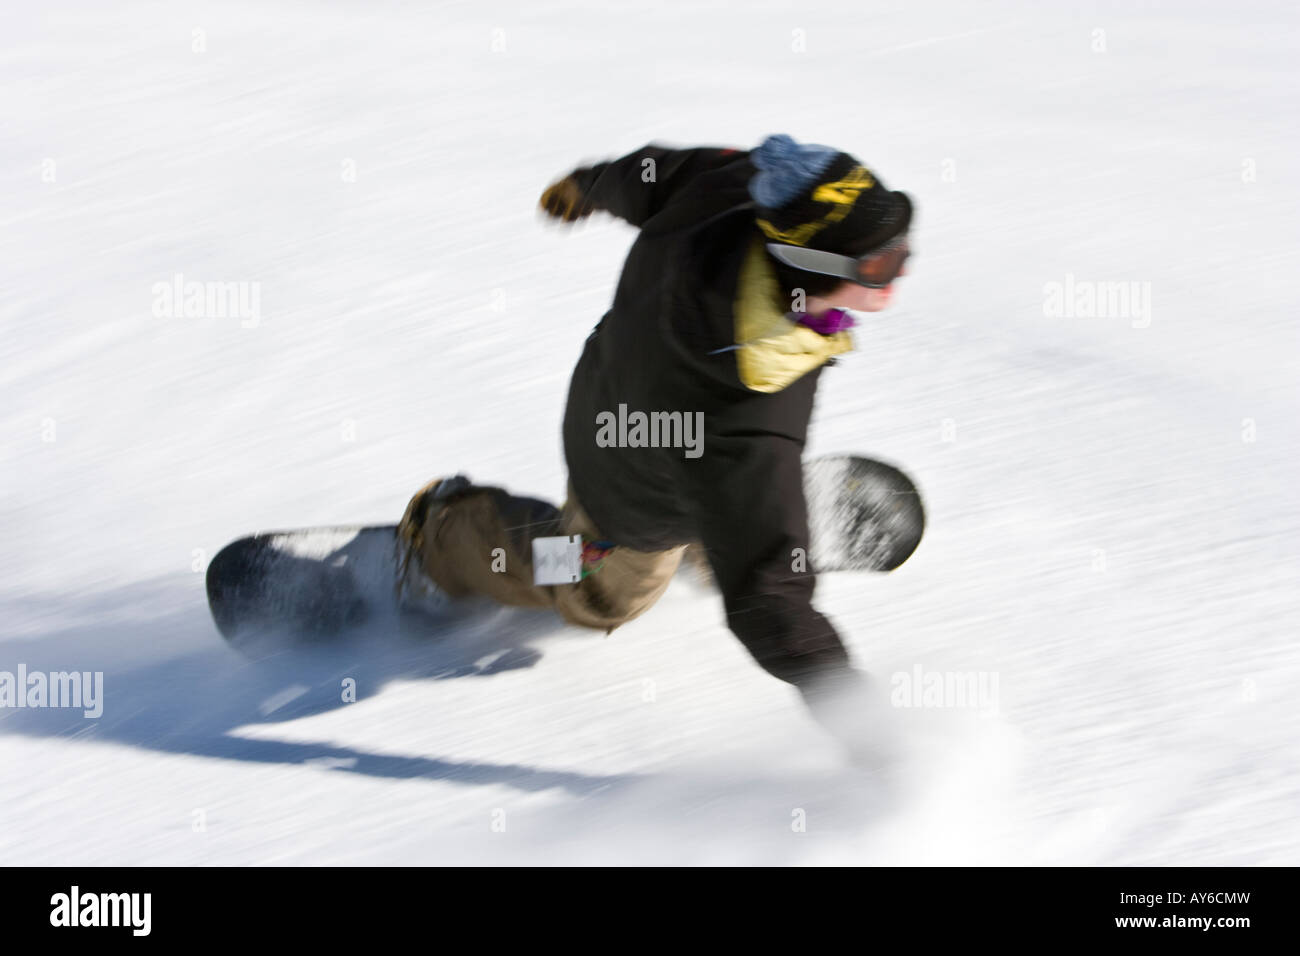 James flies down Baldy Mountain in a blur snowboarding on a winters day Stock Photo